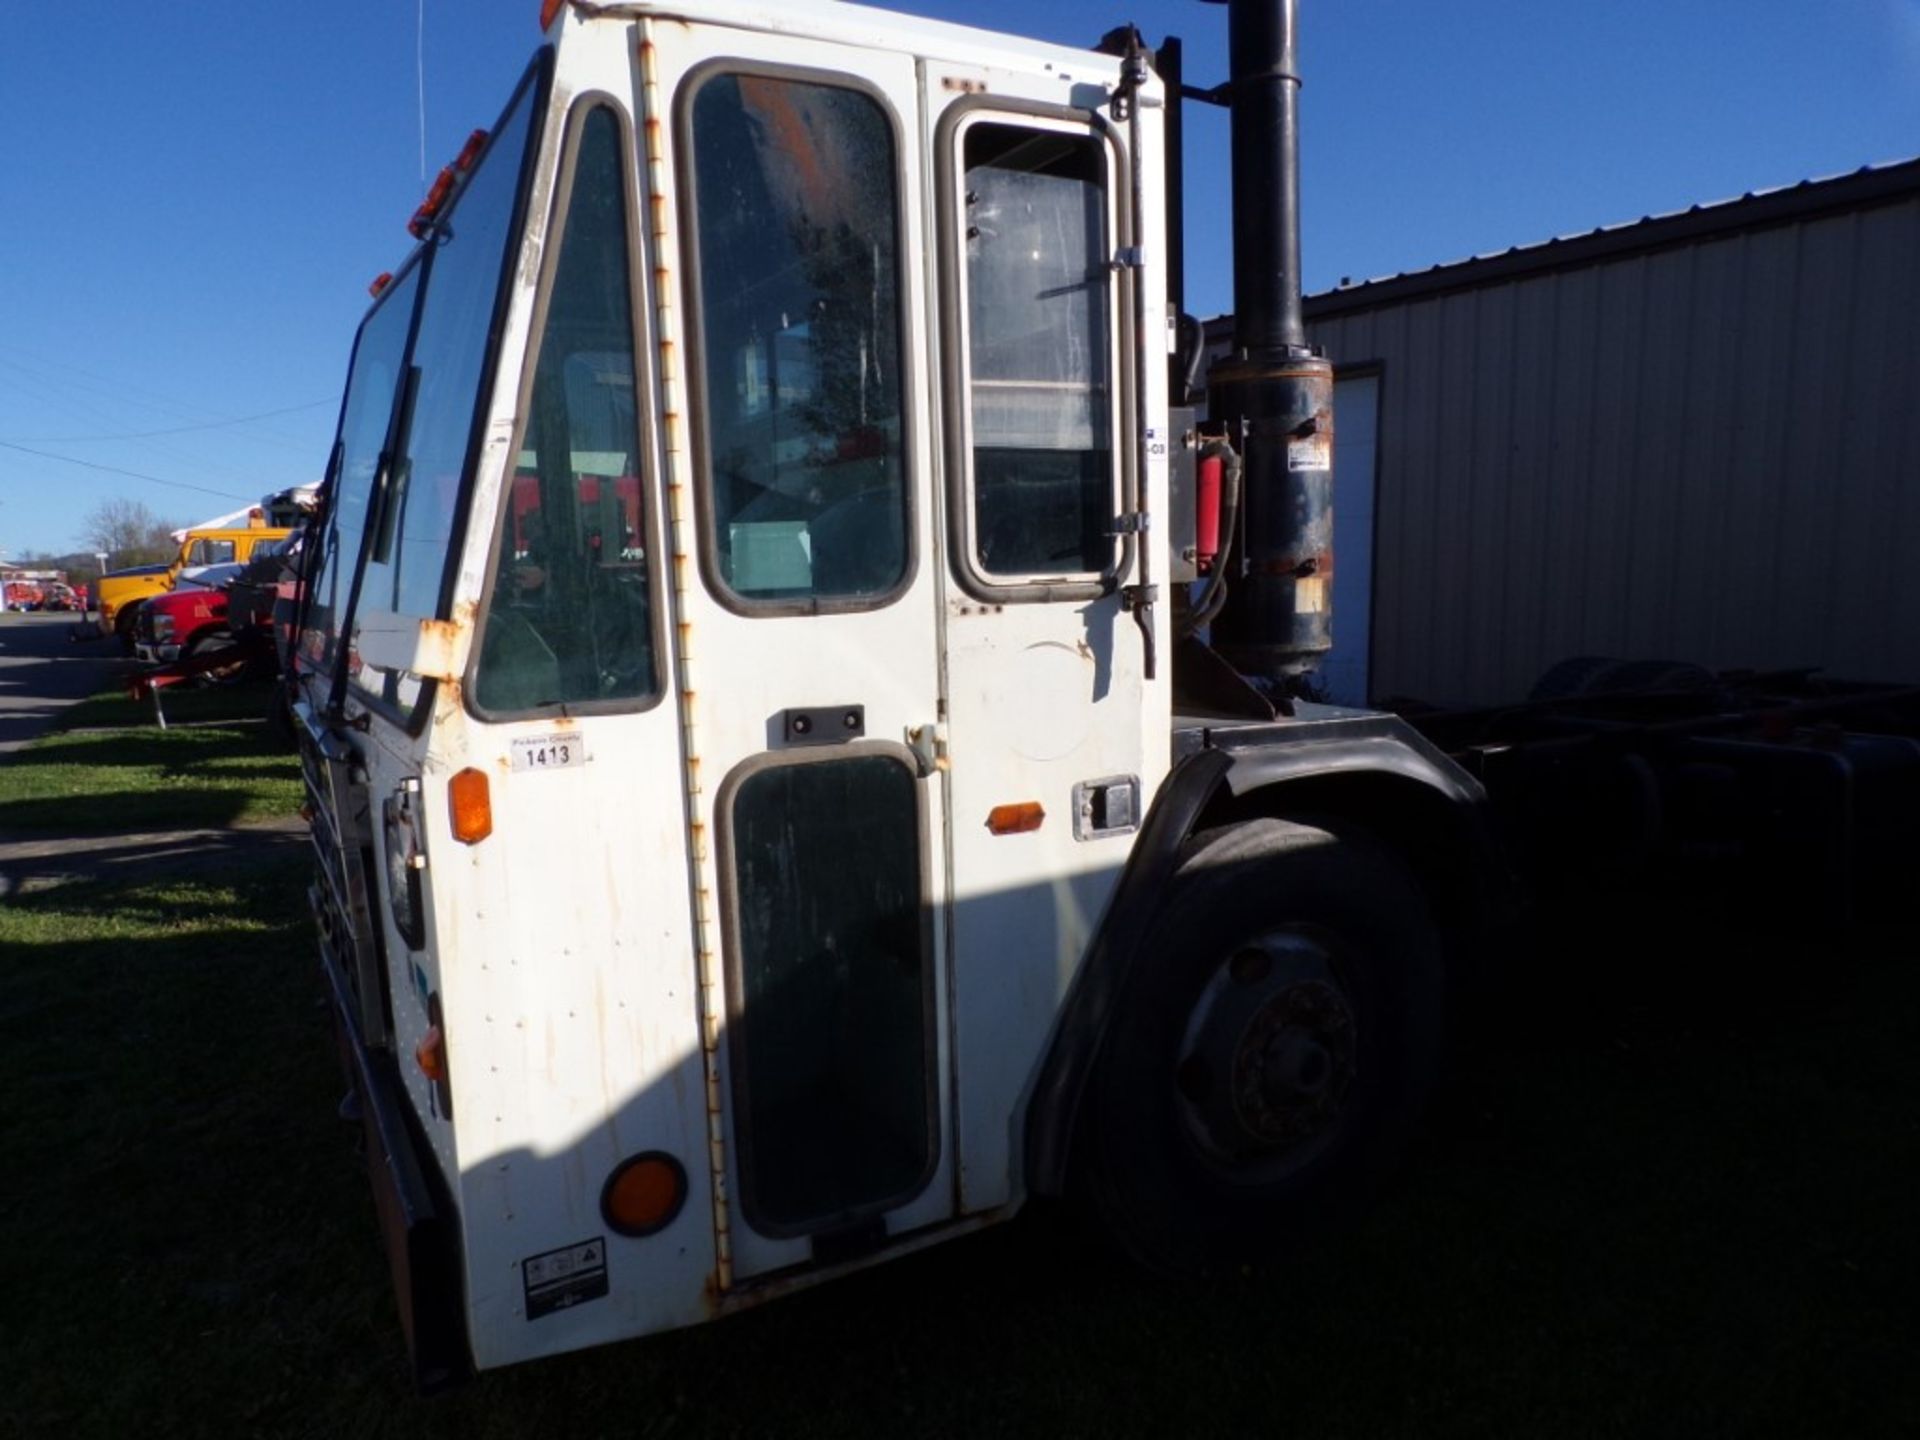 1997 Osh Kosh Cab Over Cab and Chassis, Single Axle, Auto, Detroit Series 50 4 Cycle, Original - Image 3 of 7